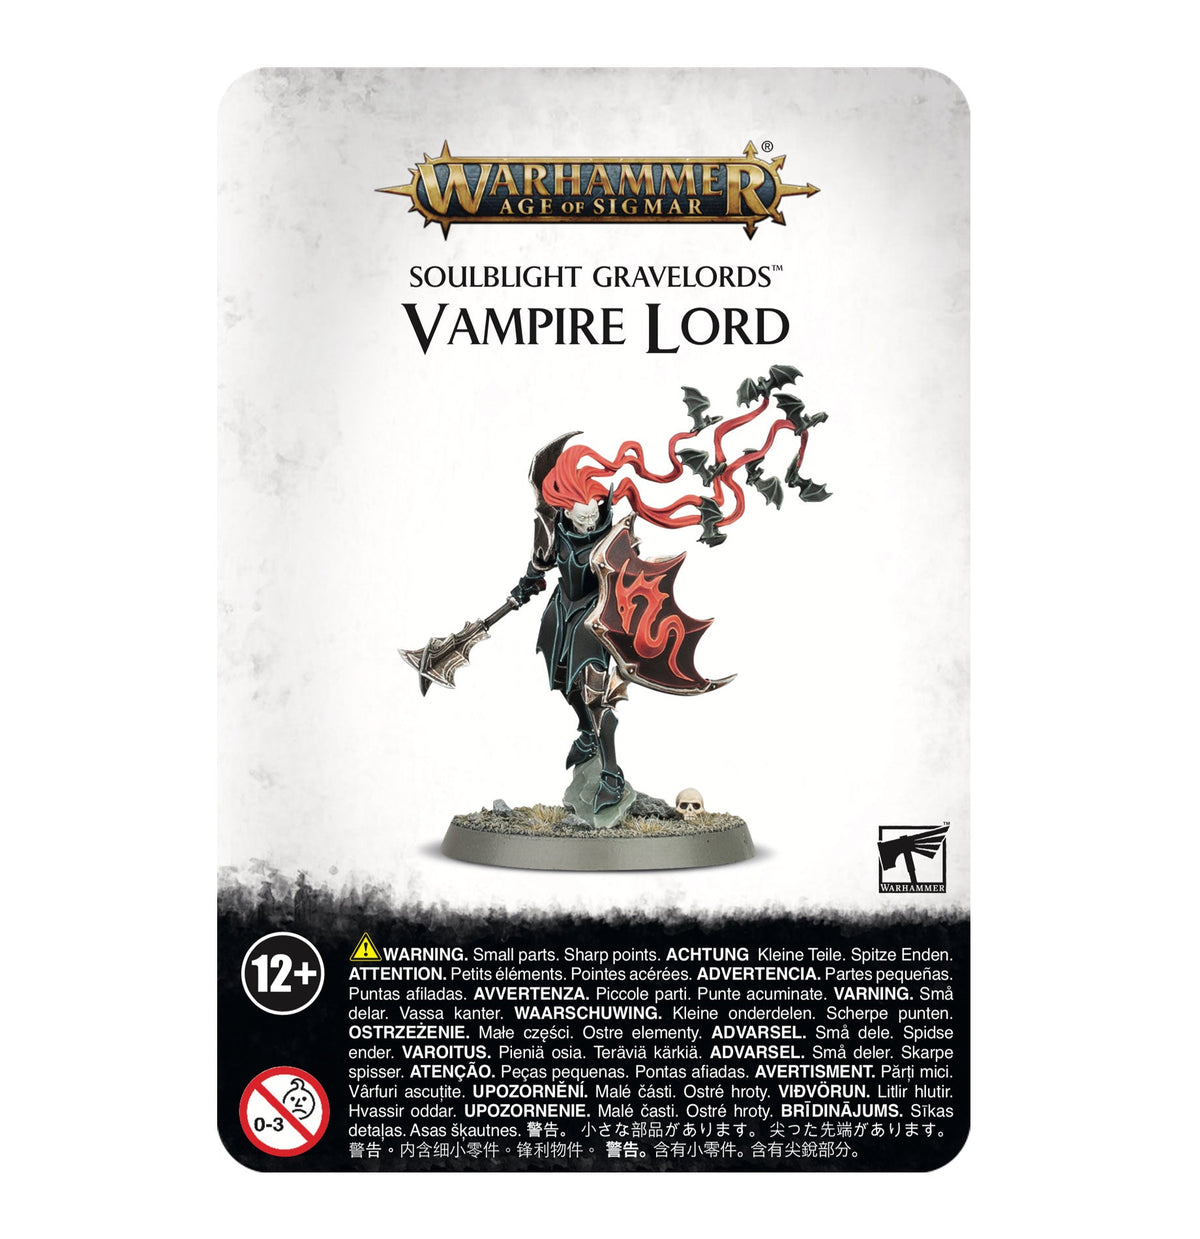 Soulblight Gravelords - Vampire Lord (Warhammer Age of Sigmar)